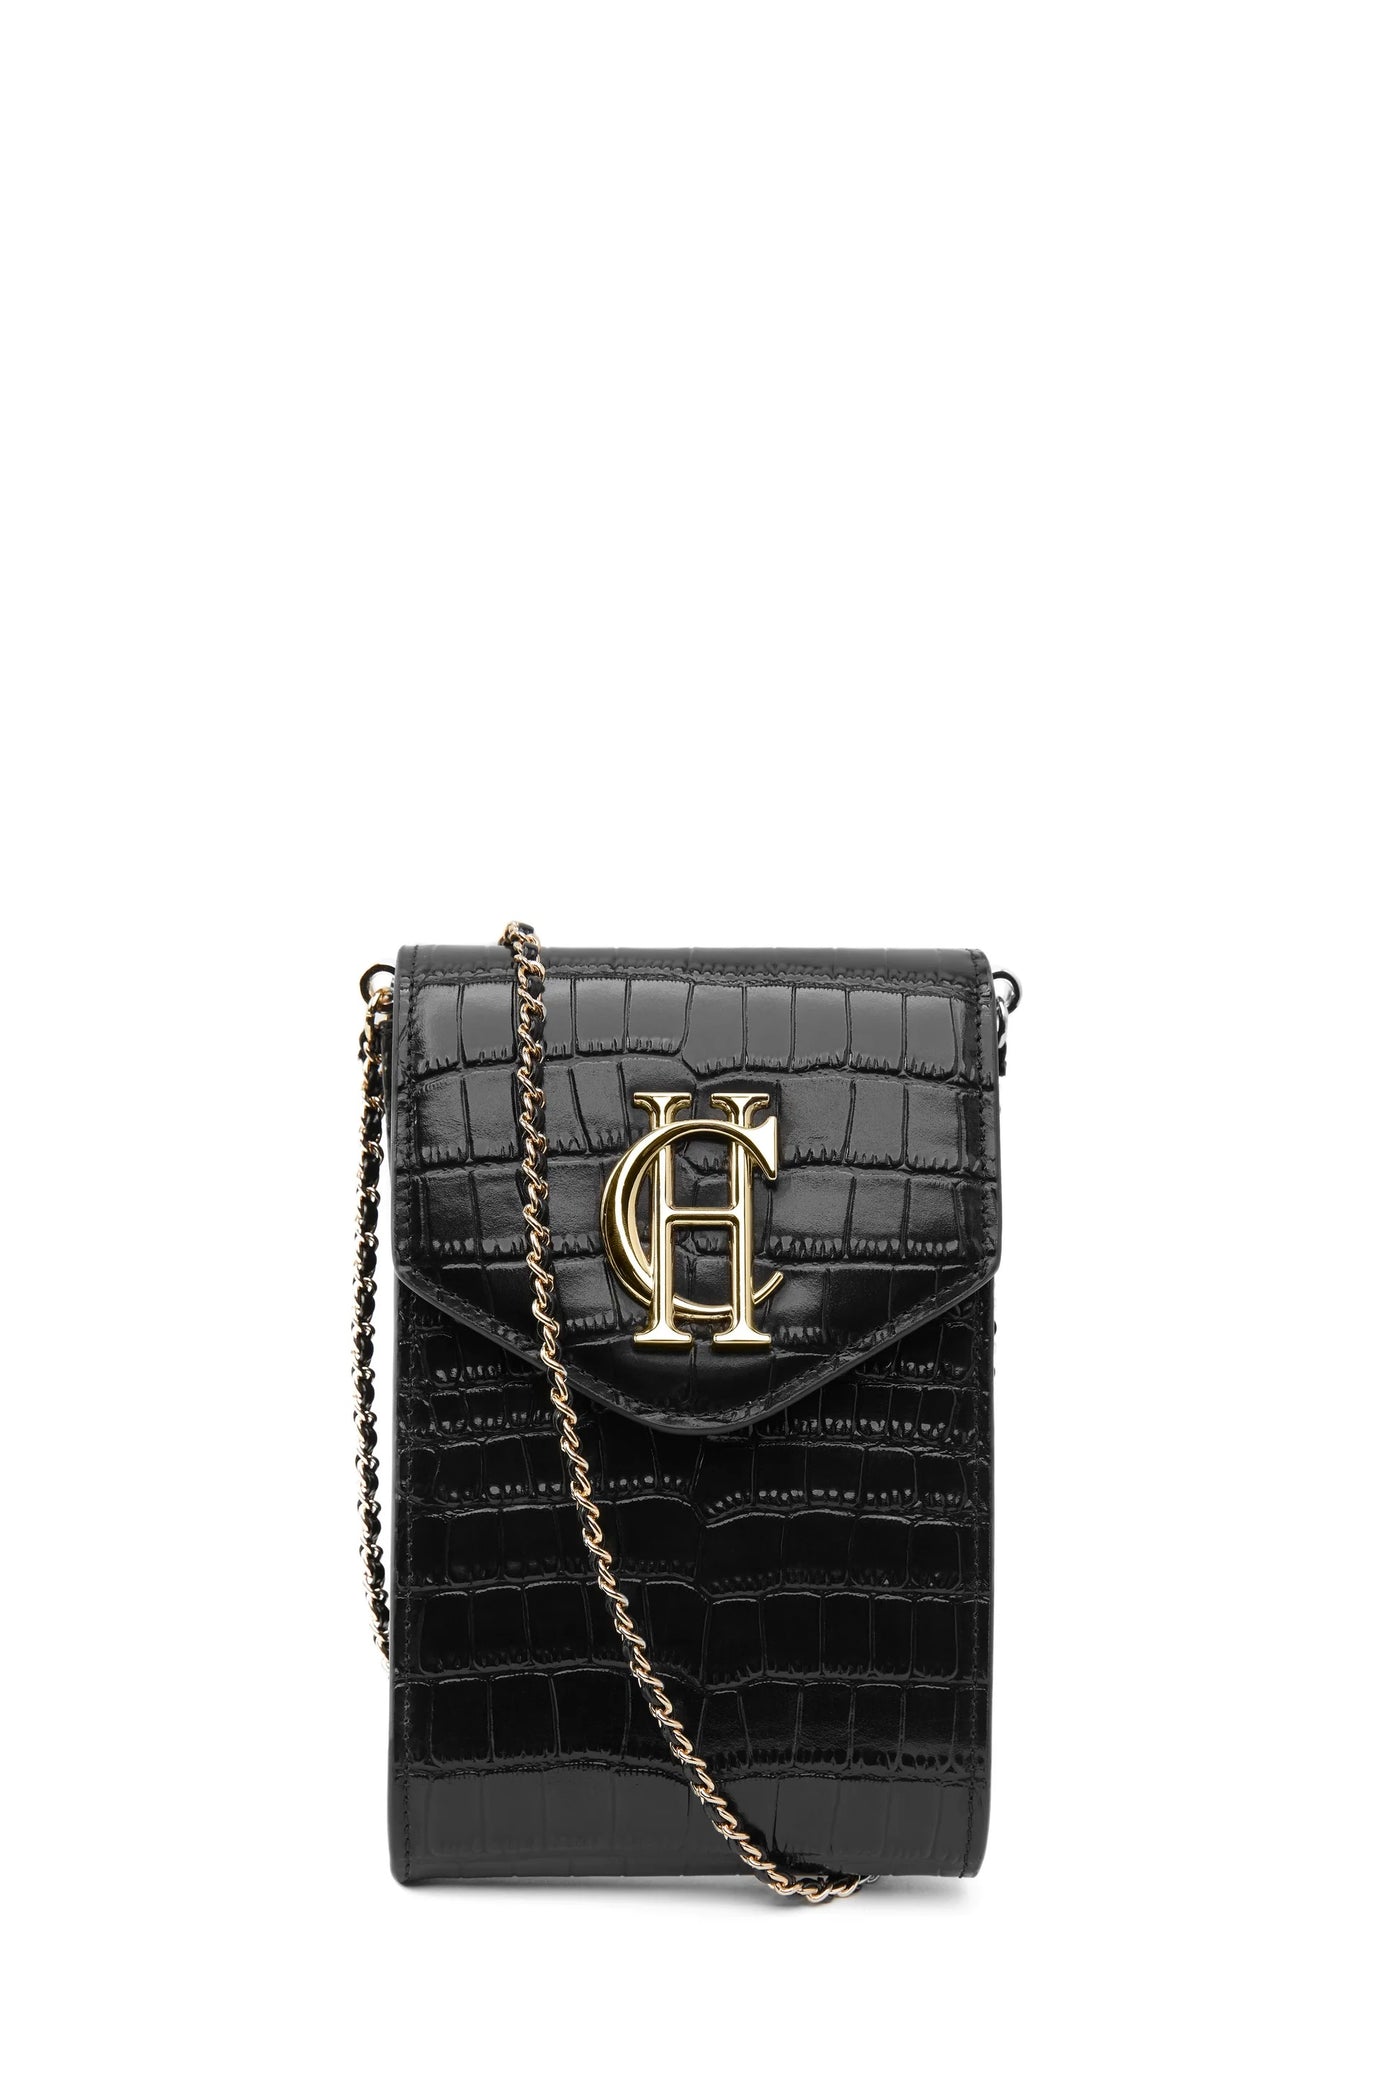 Holland Cooper Knightsbridge Ladies Phone Pouch in Black Croc Front